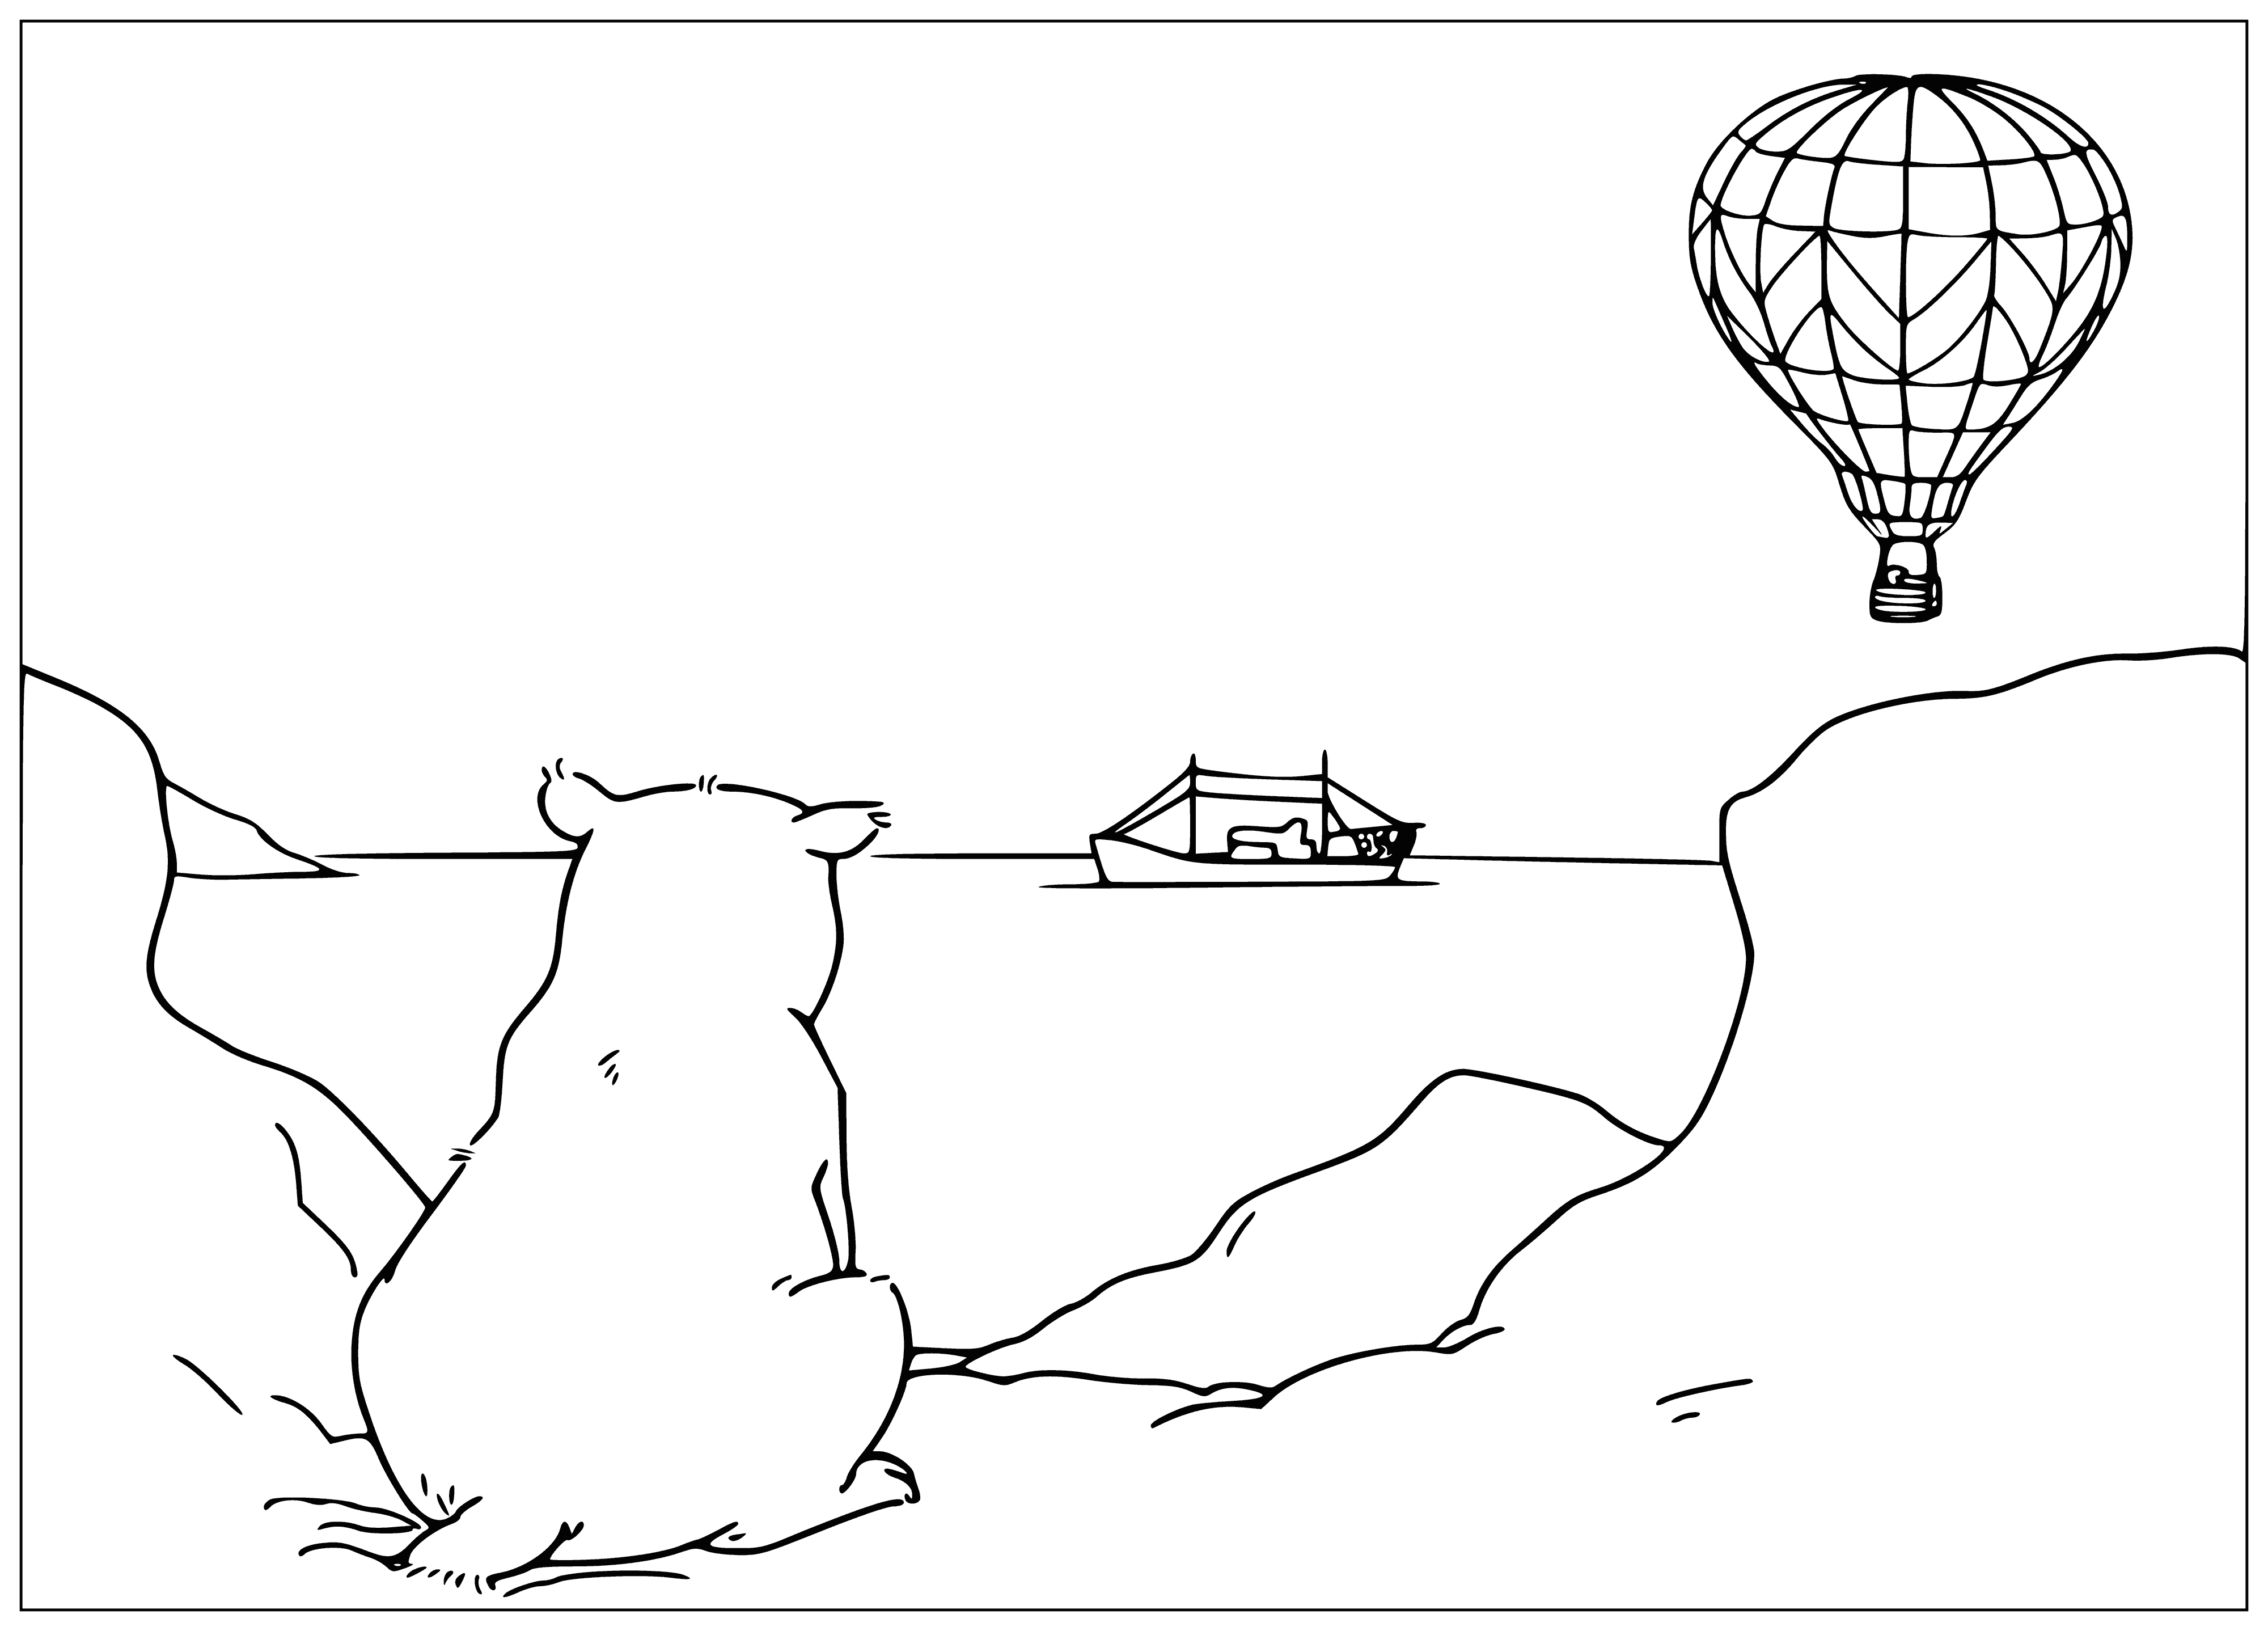 coloring page: Polar bear cub sits on ice, small black eyes, open mouth, fluffy fur. #wildlifeconservation